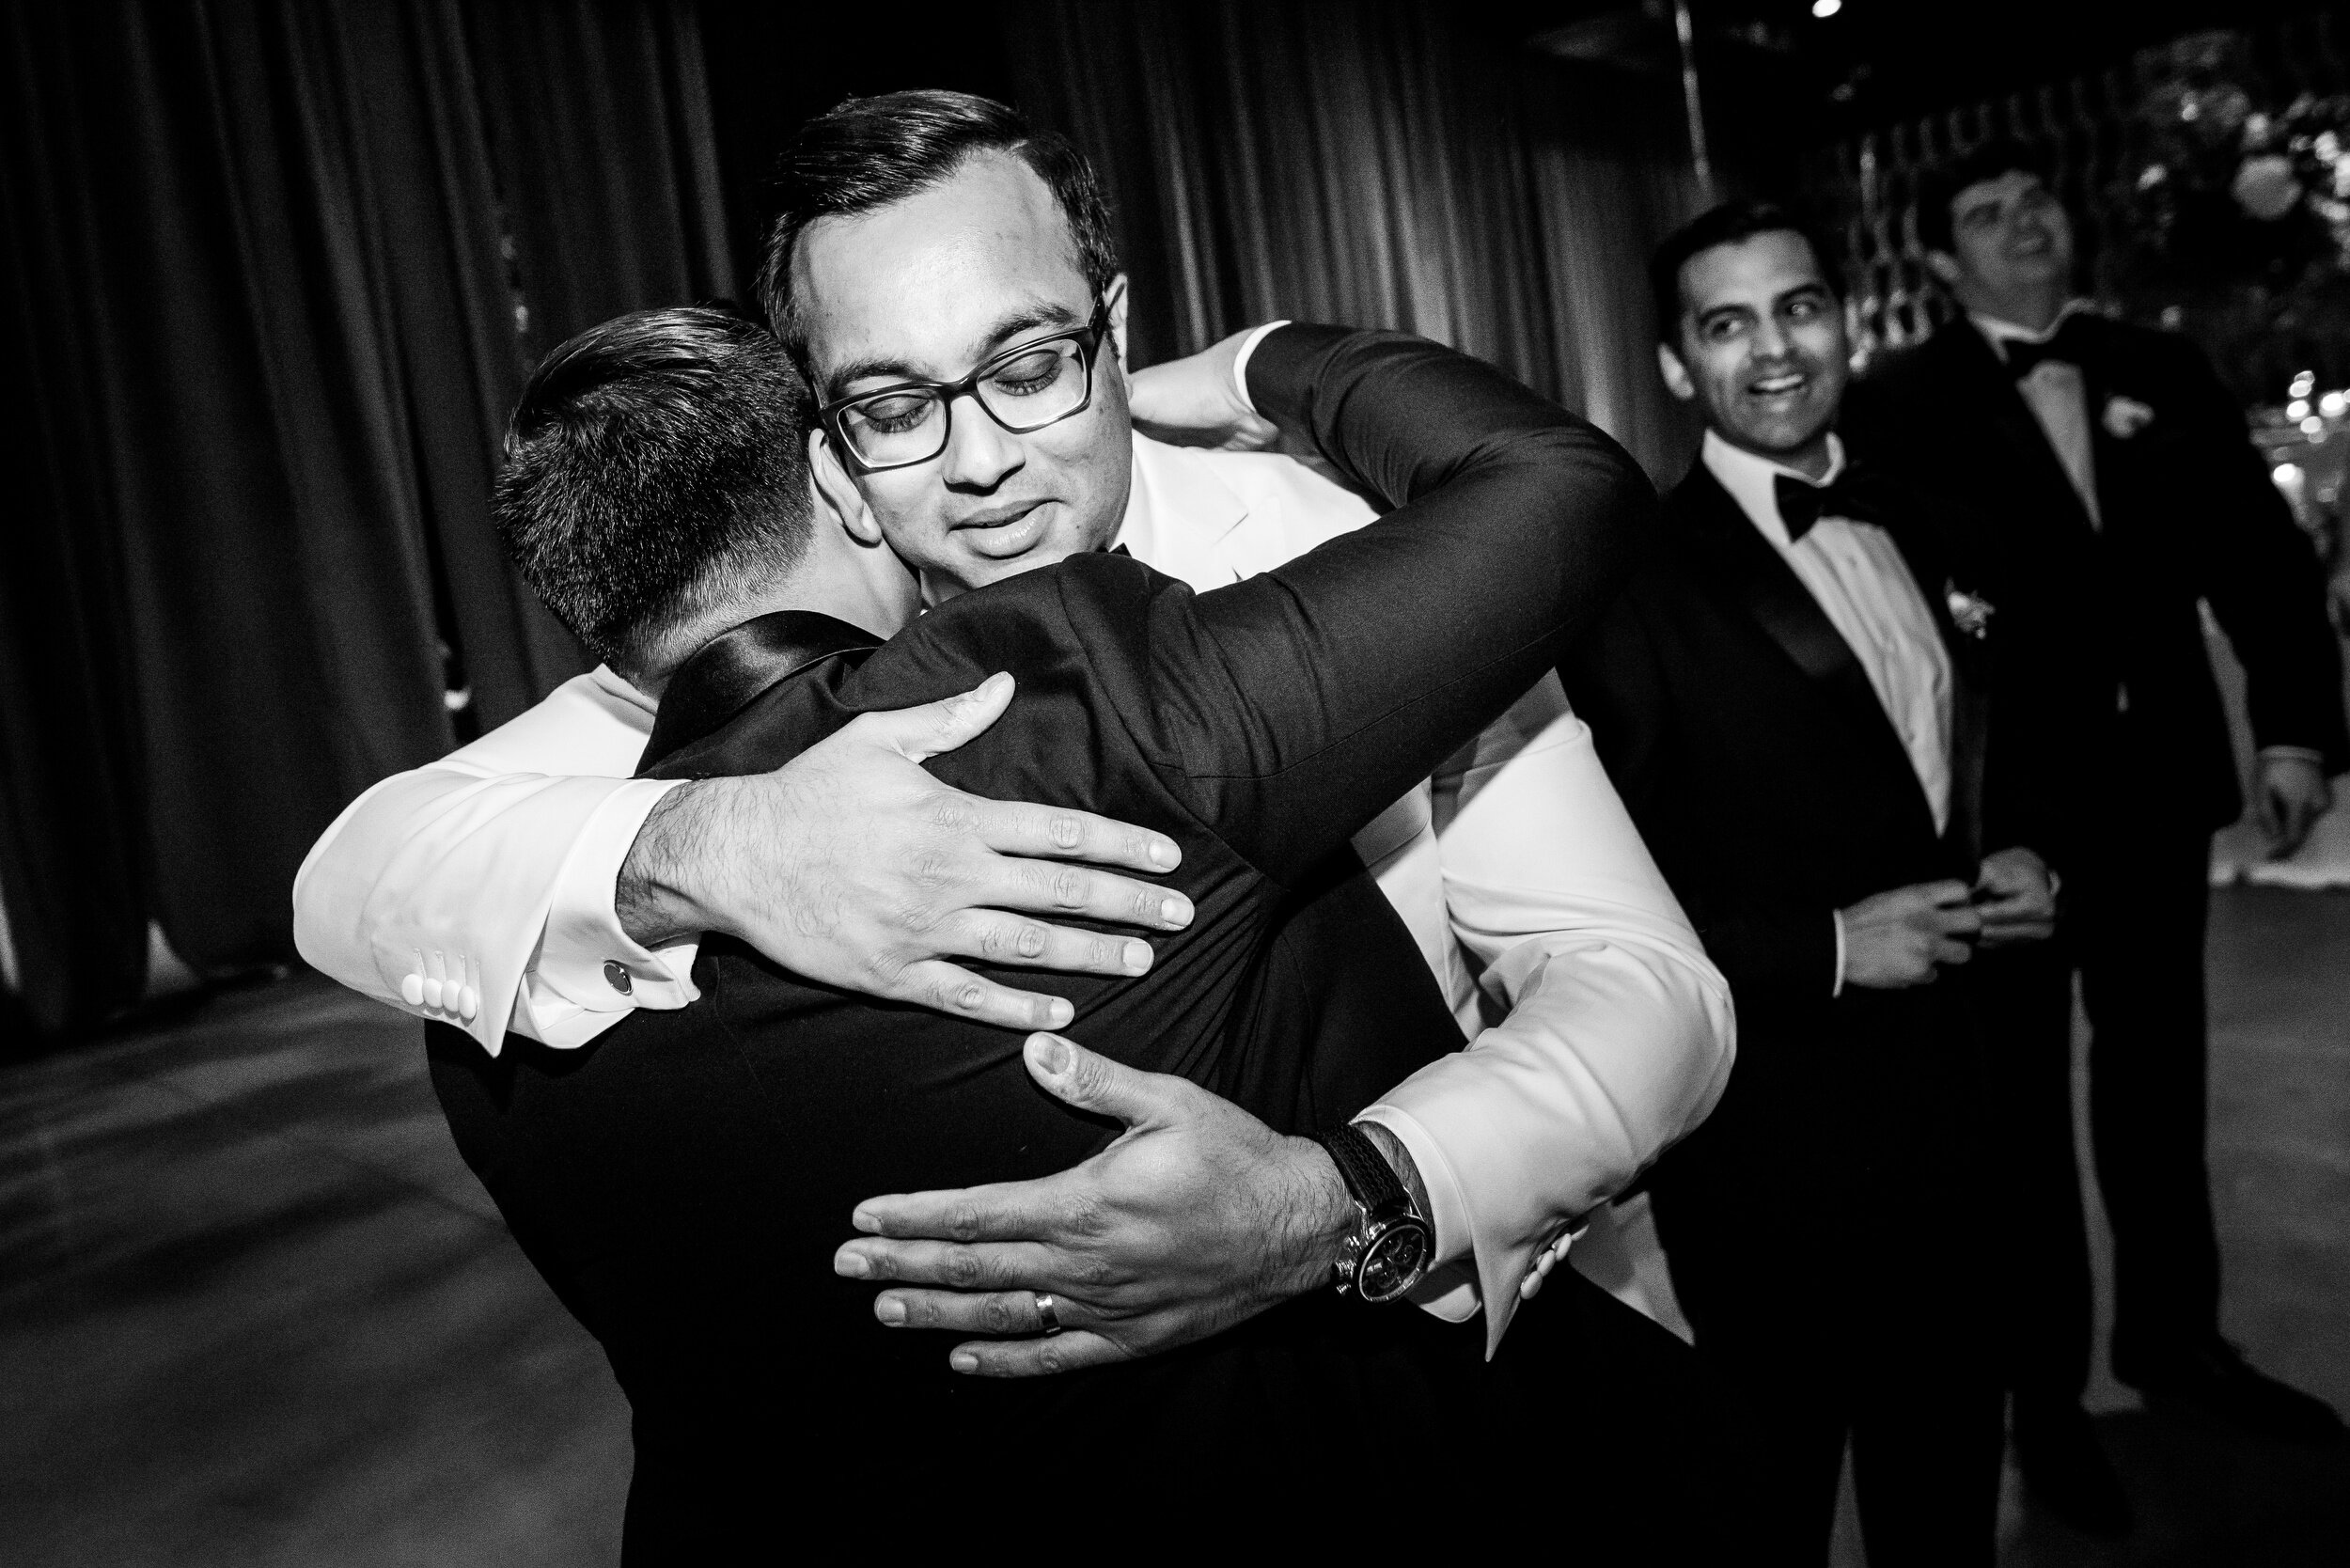 Groom hugs the best man: Geraghty Chicago wedding photography captured by J. Brown Photography.